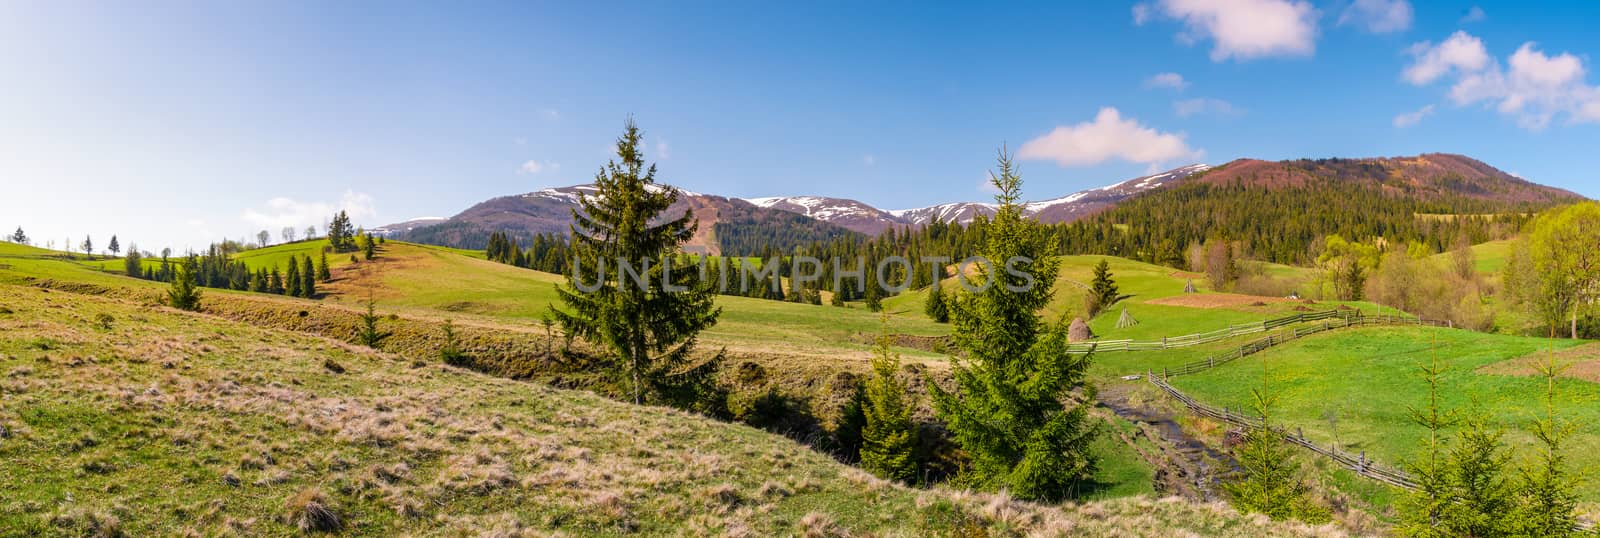 panorama of mountainous landscape in springtime. lovely scenery with spruce trees on grassy hillsides. mountain ridge with snowy peaks in the distance